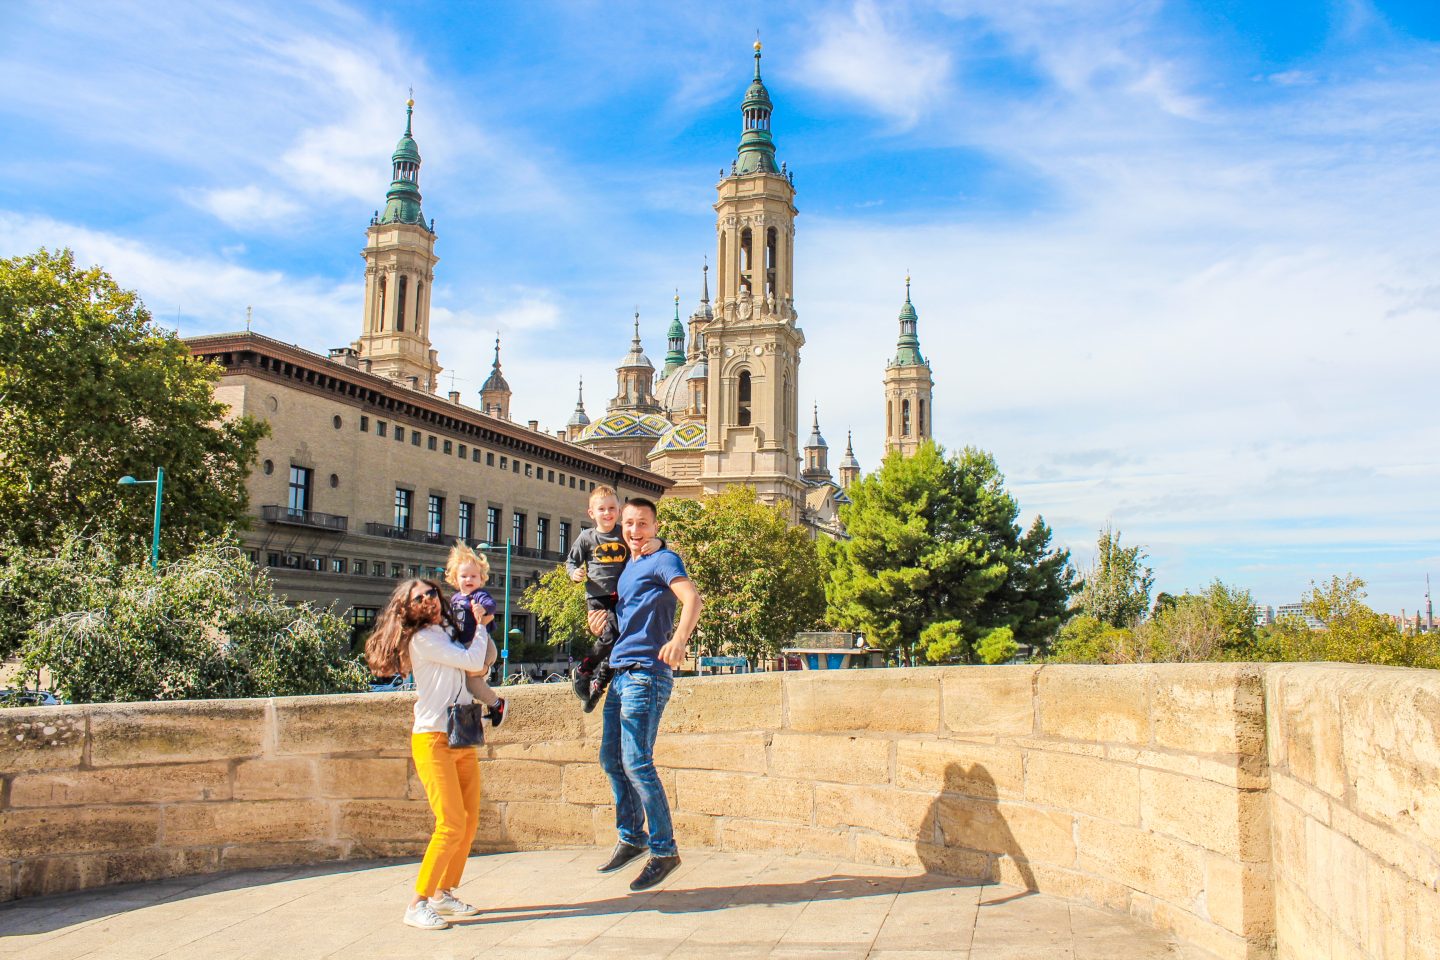 1 day trip with kids to Zaragoza. Top things to see with kids.